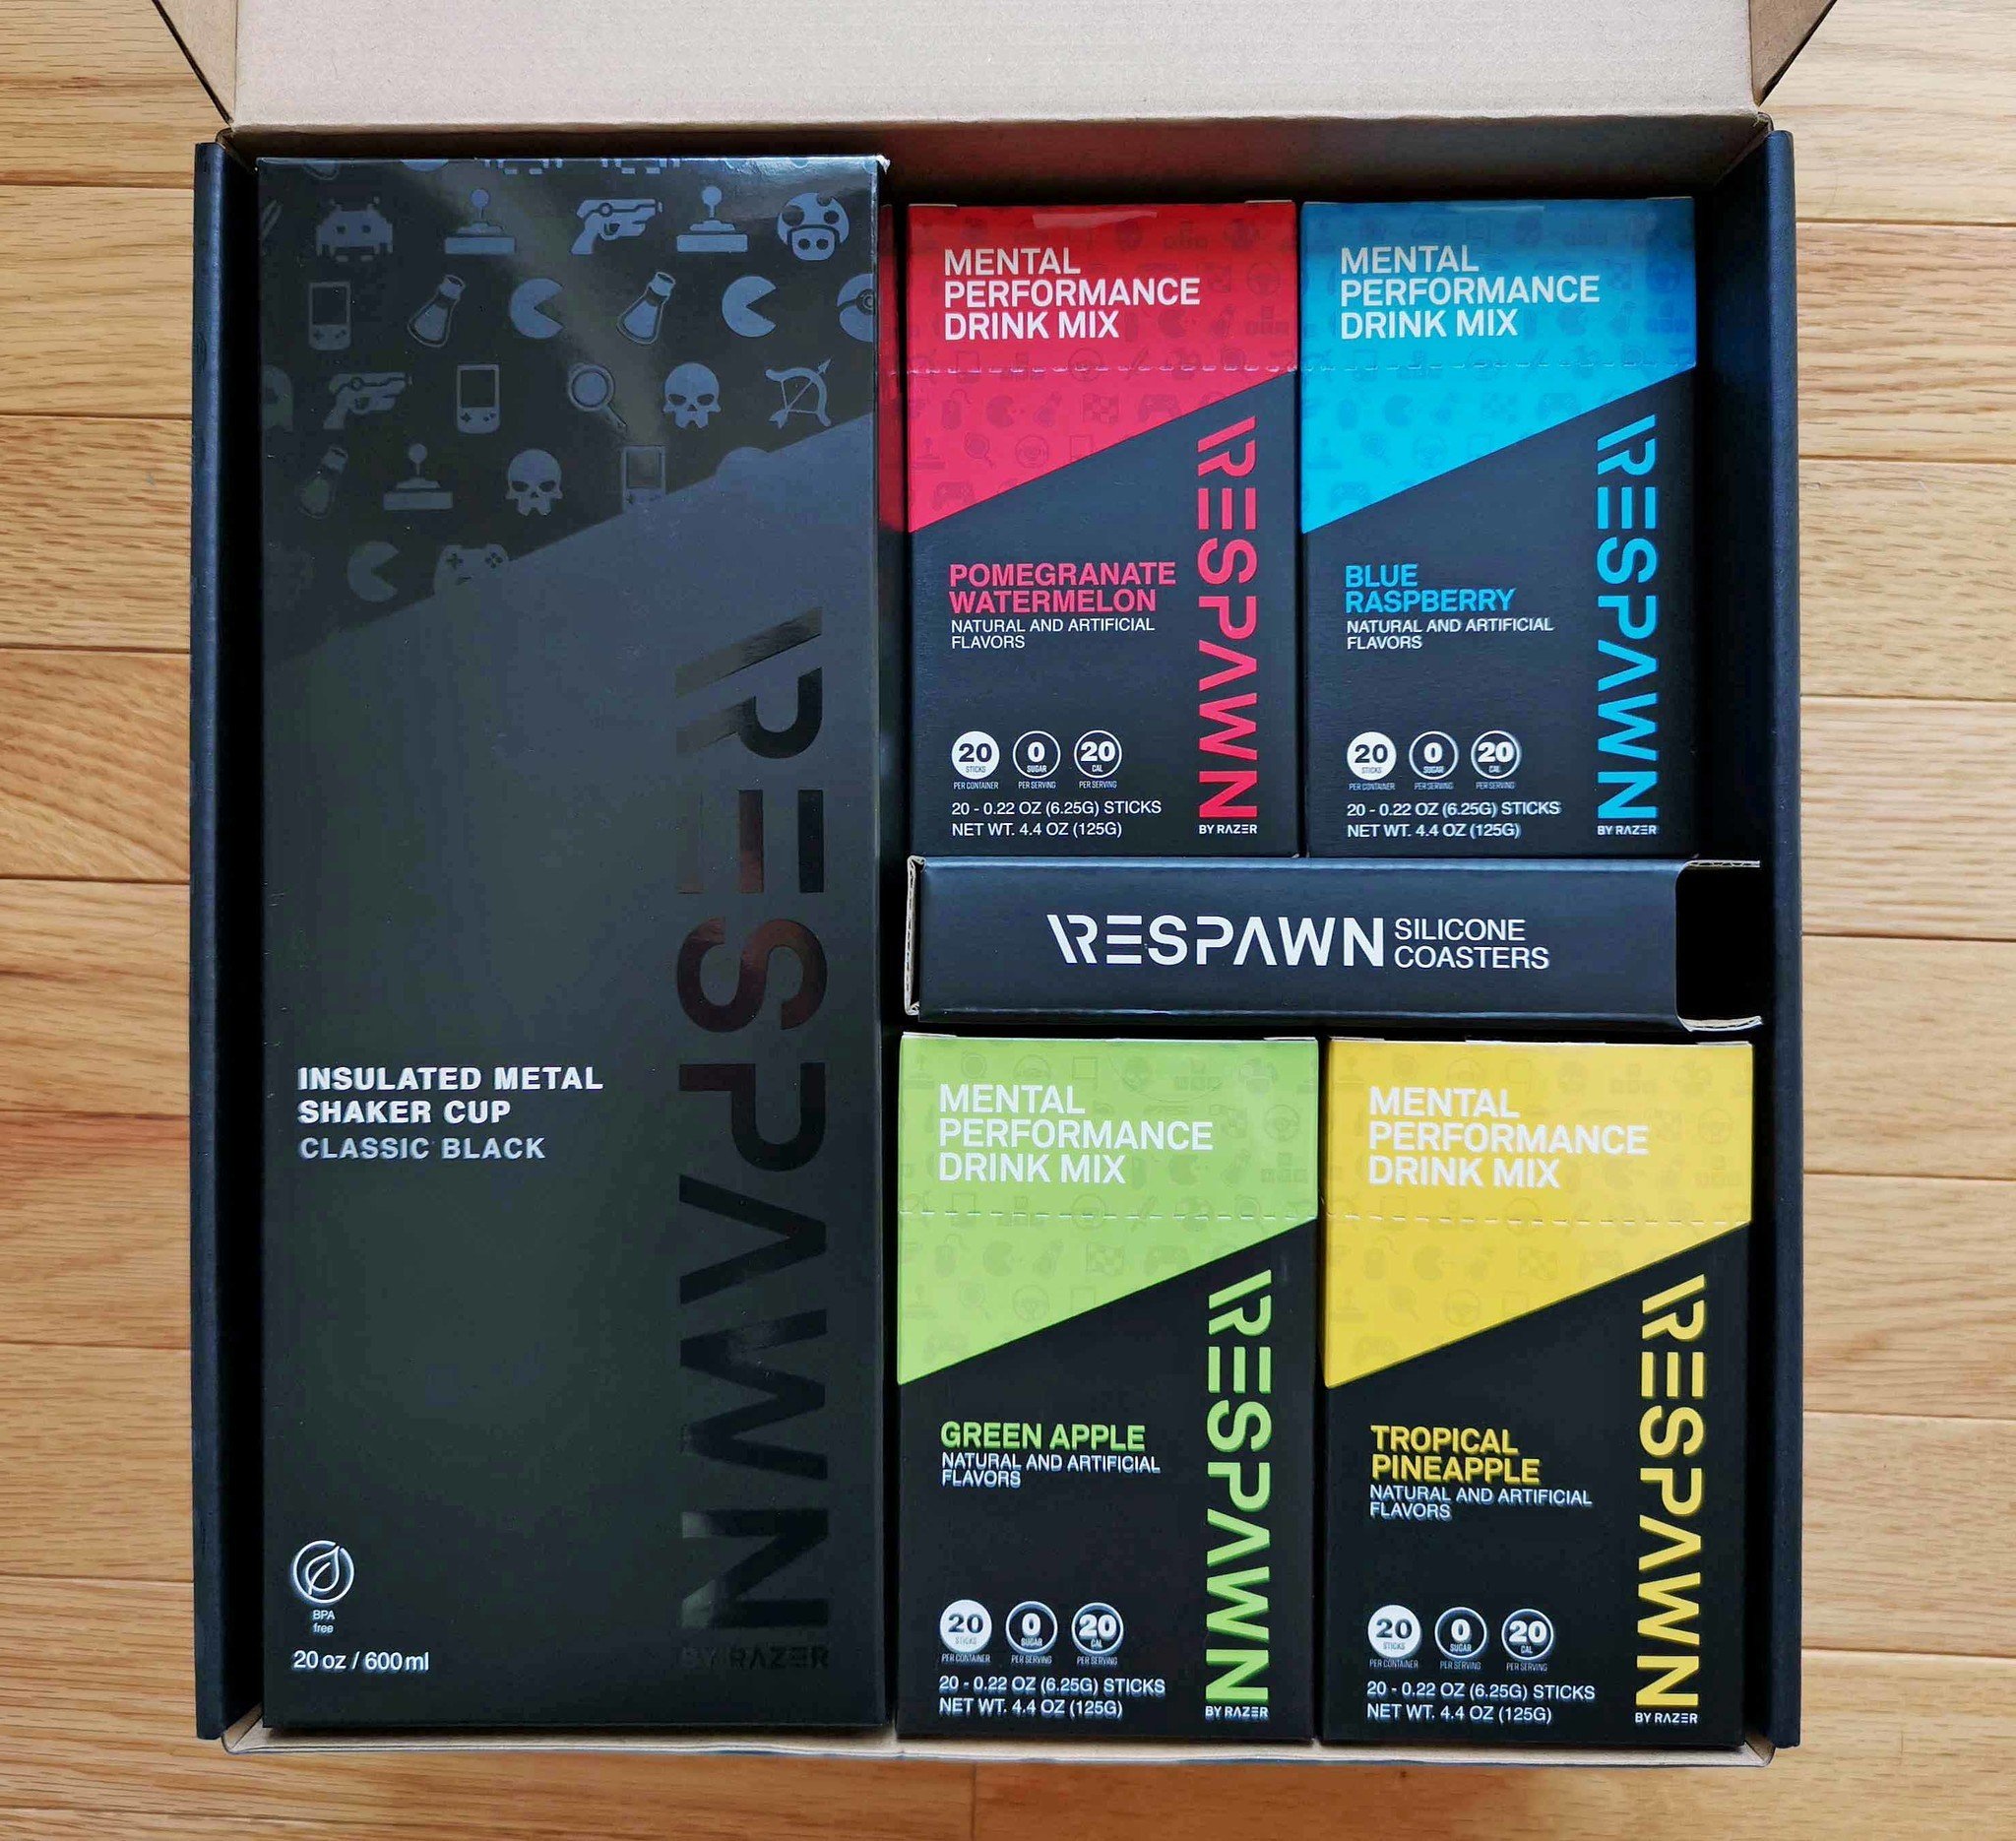 RESPAWN by Razer is a 'mental performance drink' made for gamers that  tastes pretty good